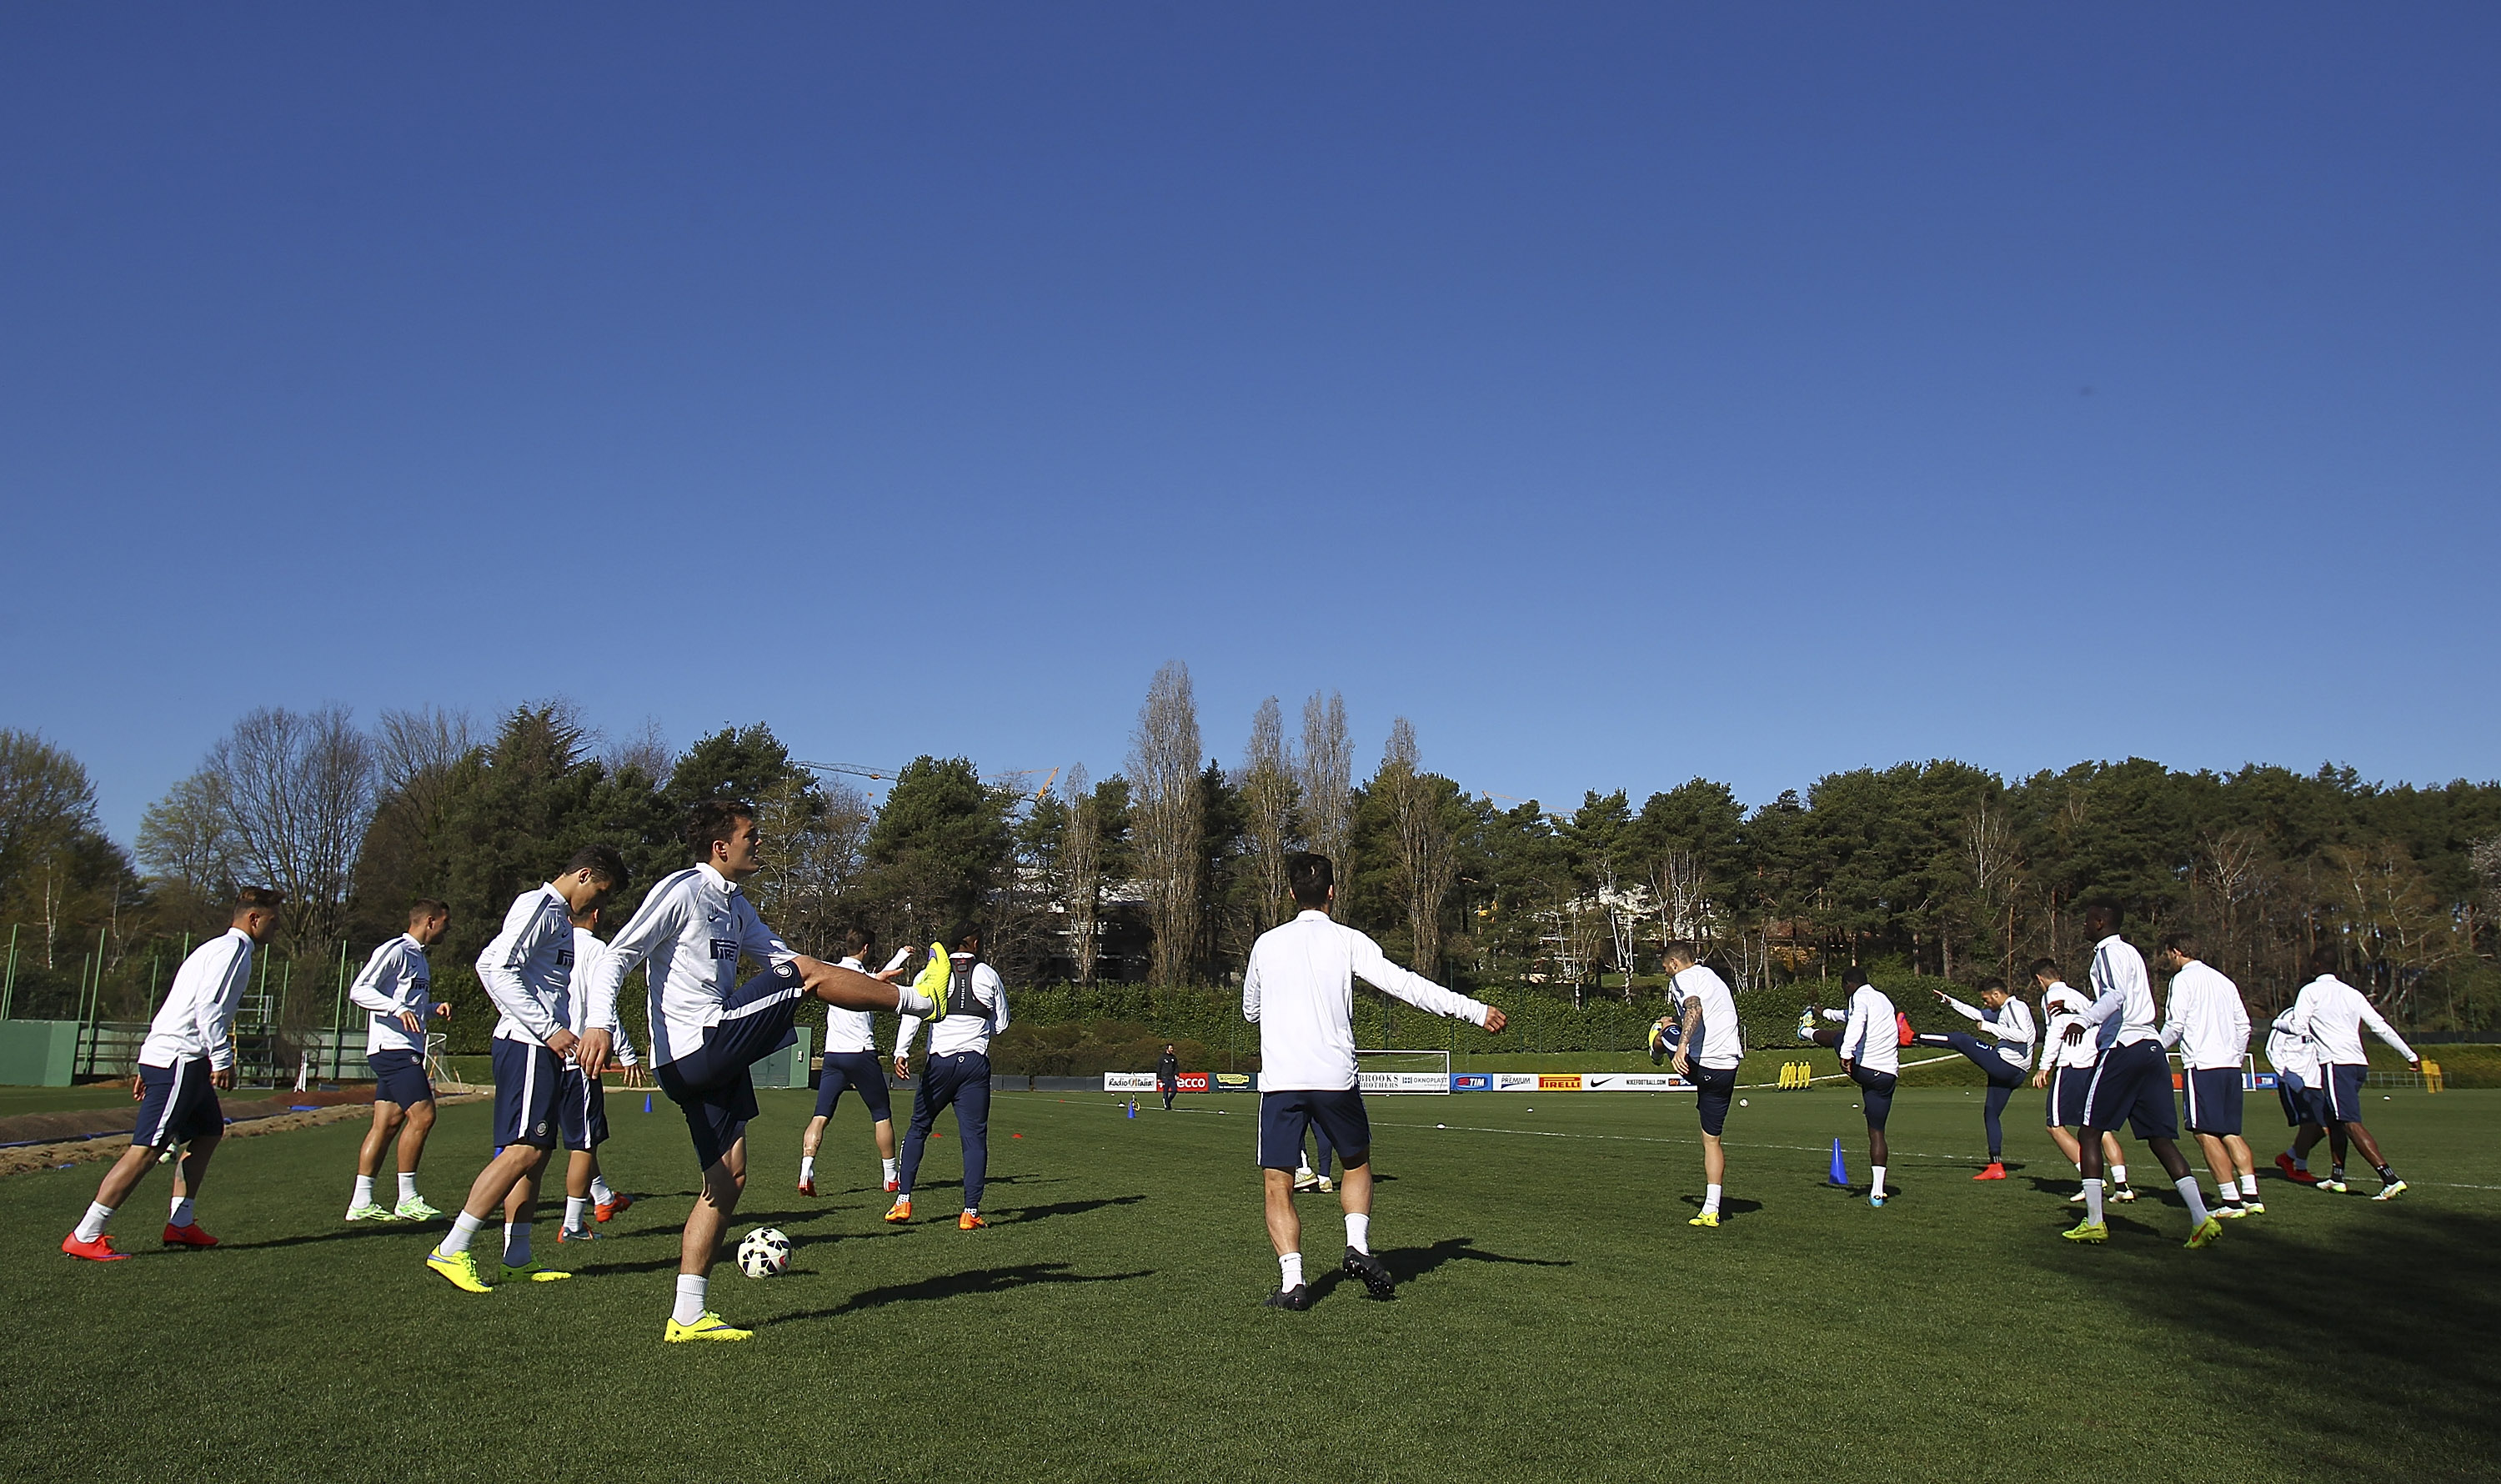 FCIN: First training session ahead of Inter-Udinese